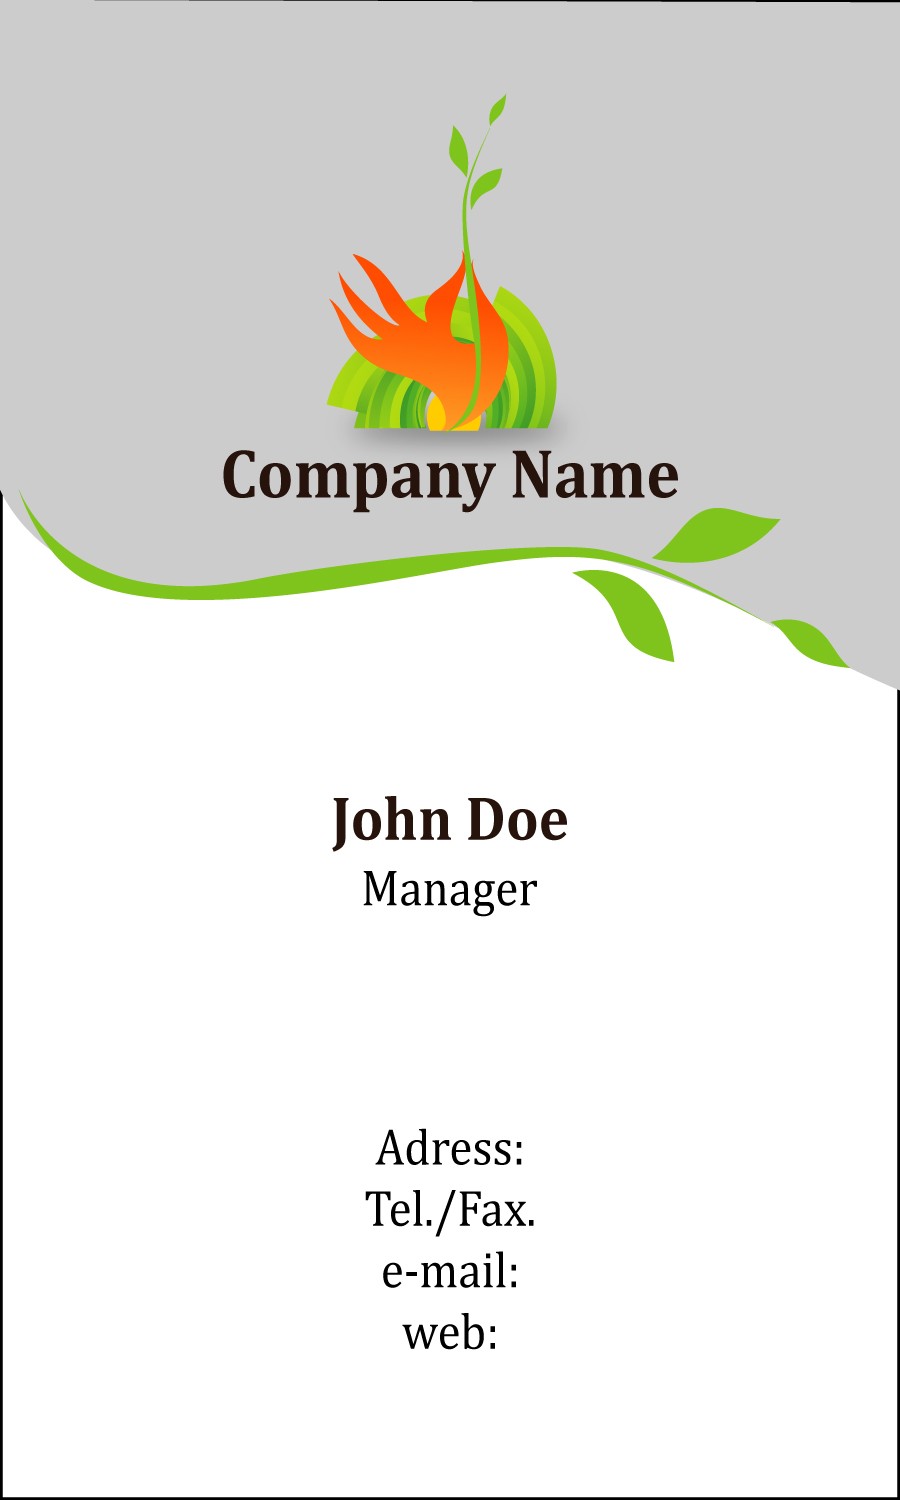 36-business-card-sample-template